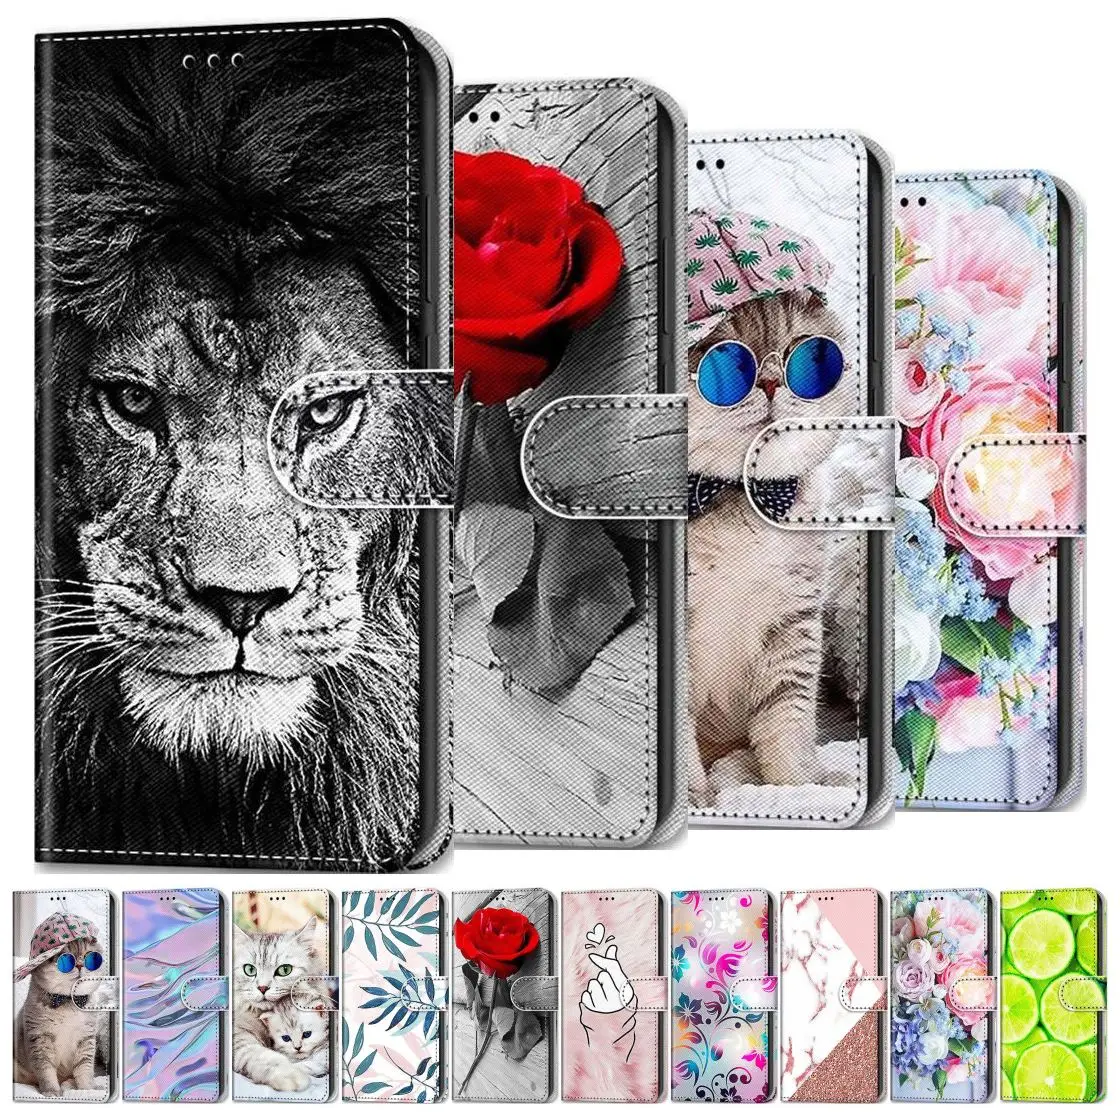 Rose Lion Painted Phone Shell For Etui Samsung Galaxy S5 S6 S7 S8 S9 S10  Plus S10e S20 Fe Cute Funny Card Slot Case A42 5g Dp08f - Buy Wallet  Cases,Cellphones &